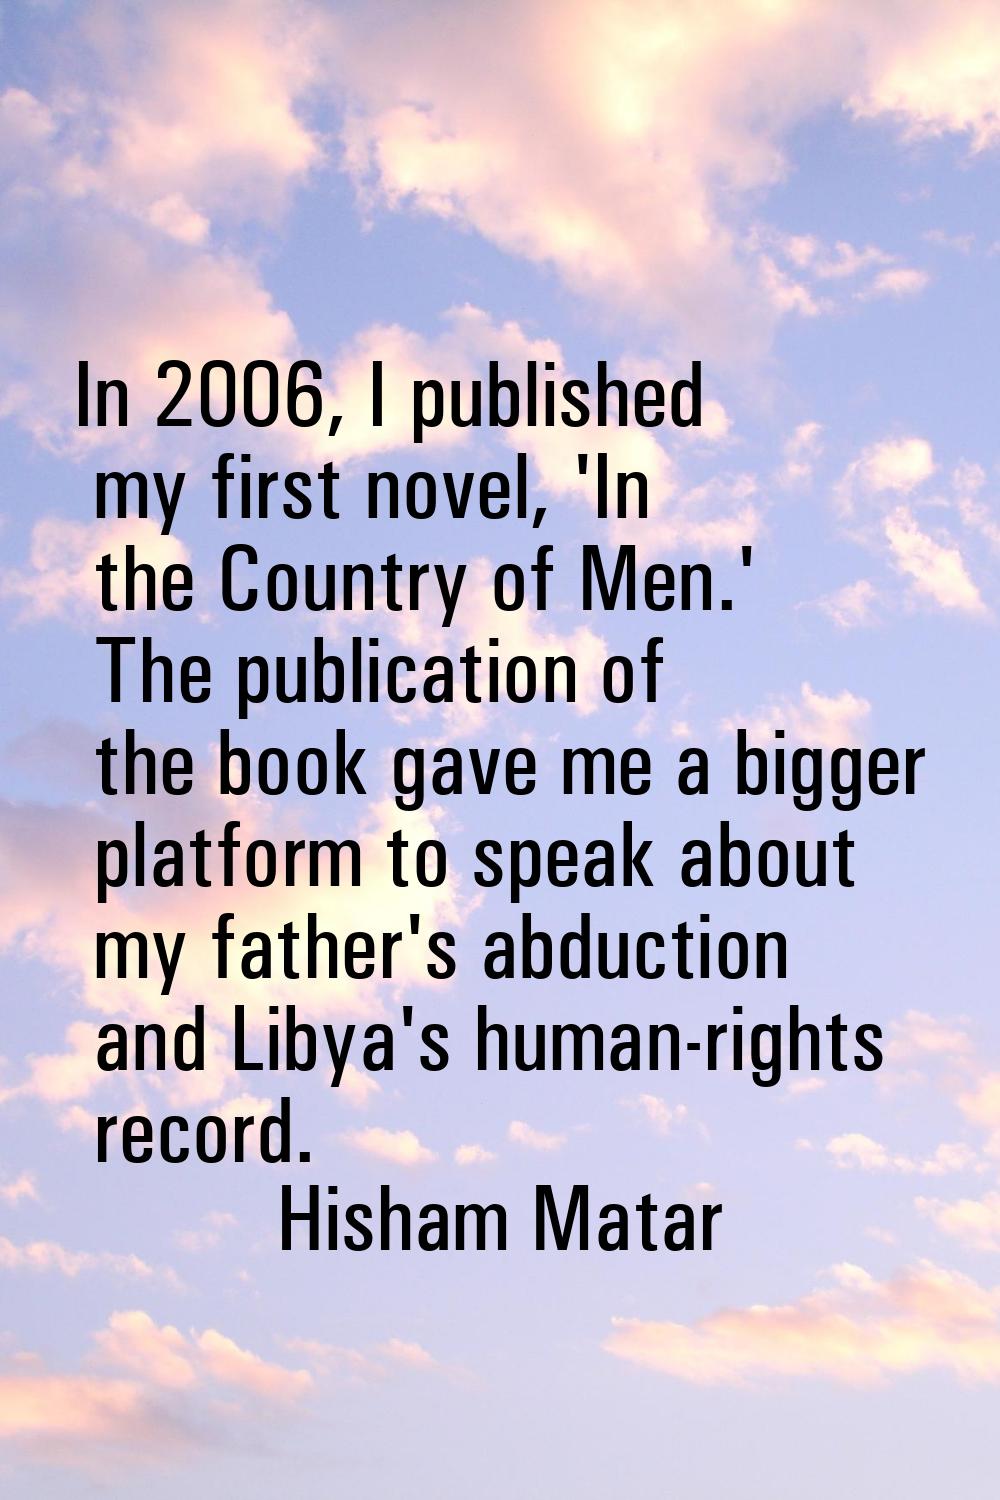 In 2006, I published my first novel, 'In the Country of Men.' The publication of the book gave me a